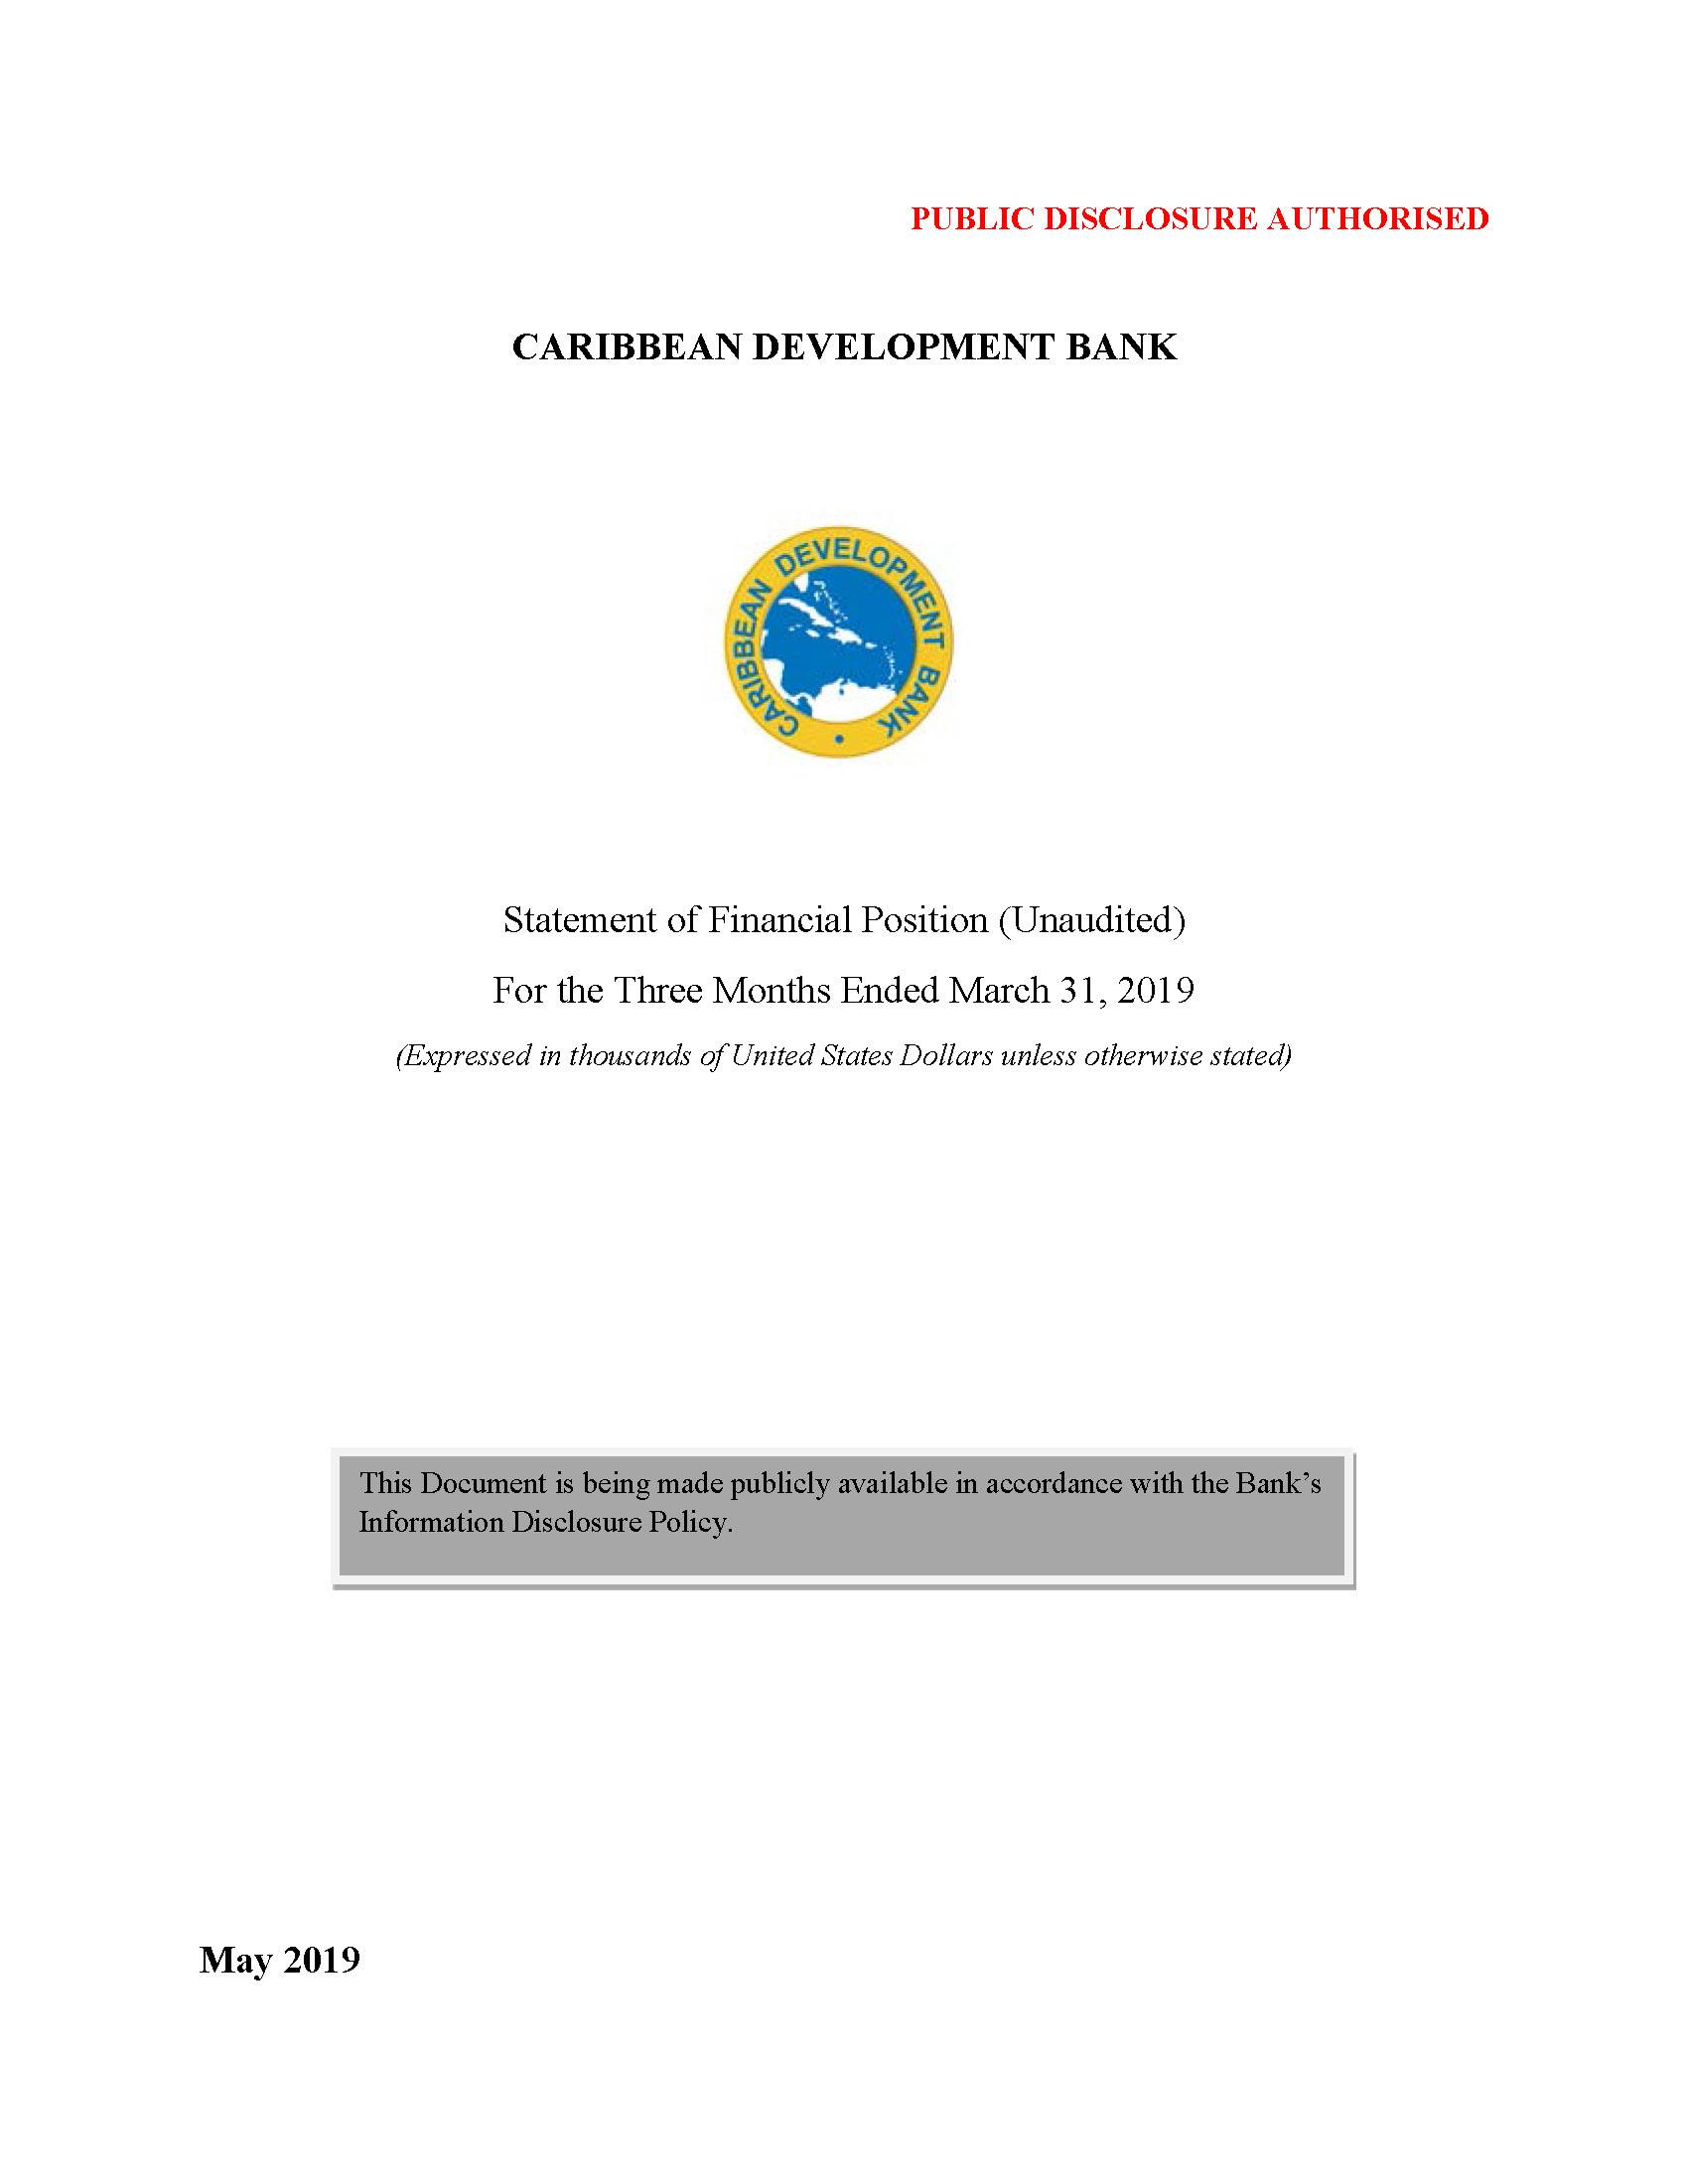 Text based cover featuring document title and CDB logo